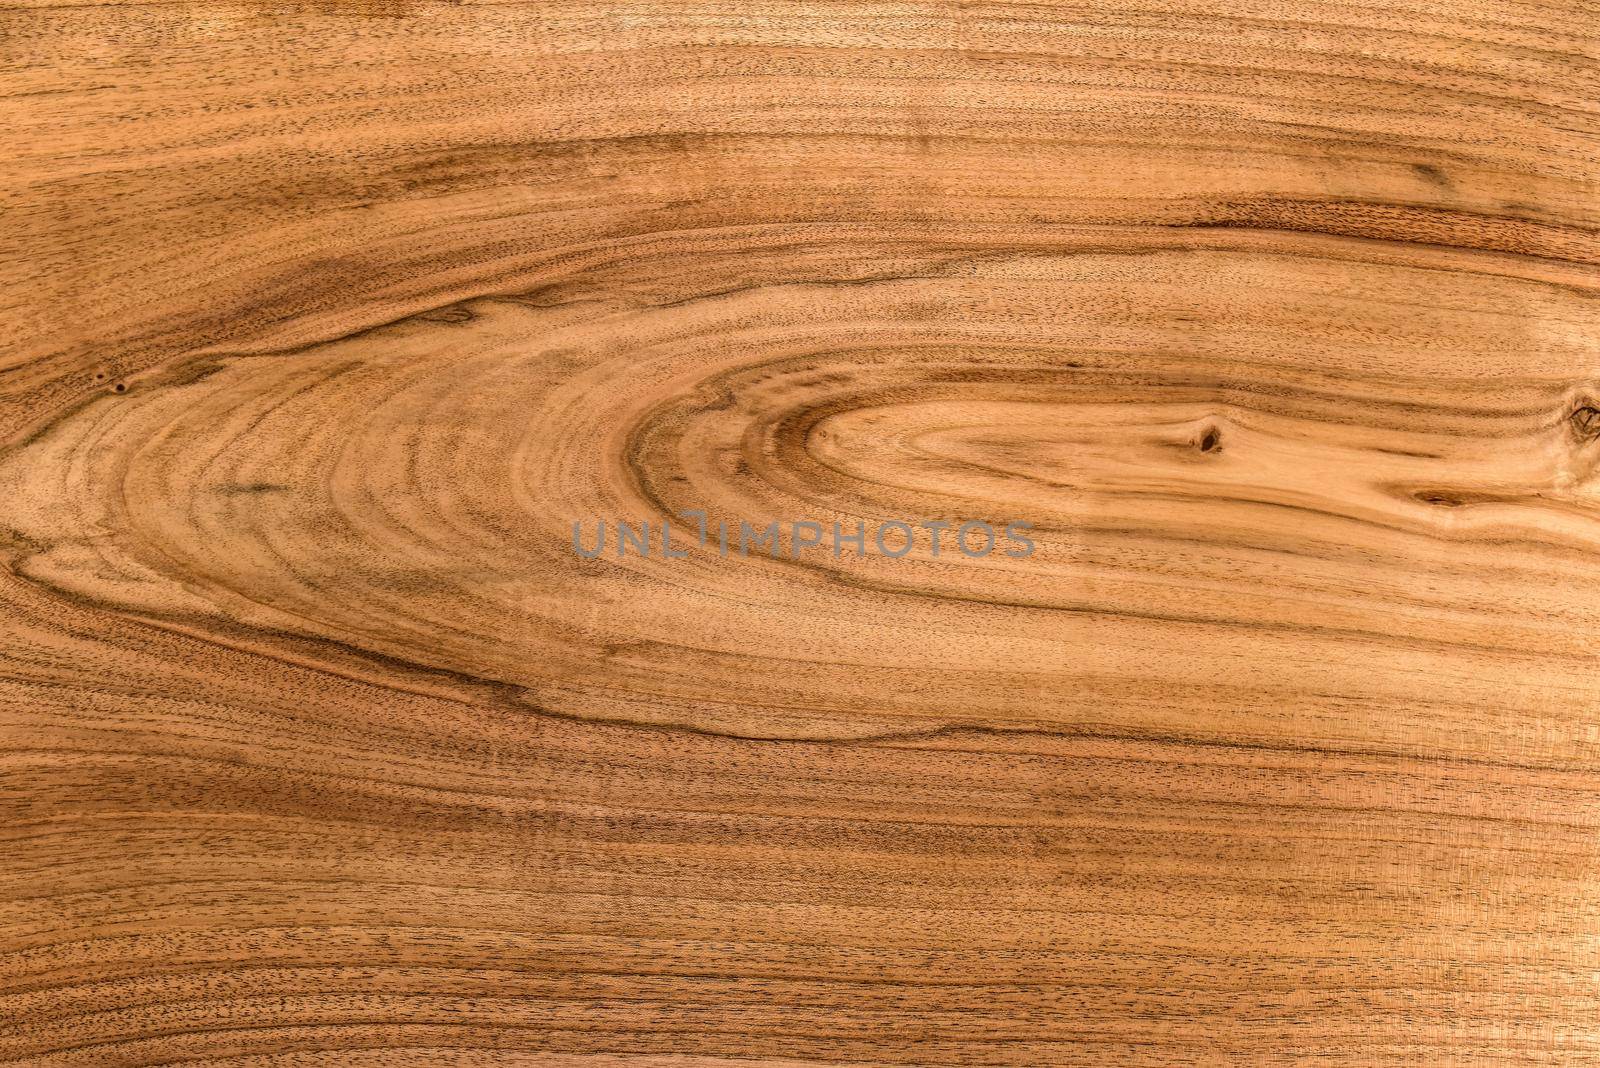 background and texture of Walnut wood decorative furniture surface by Nickstock